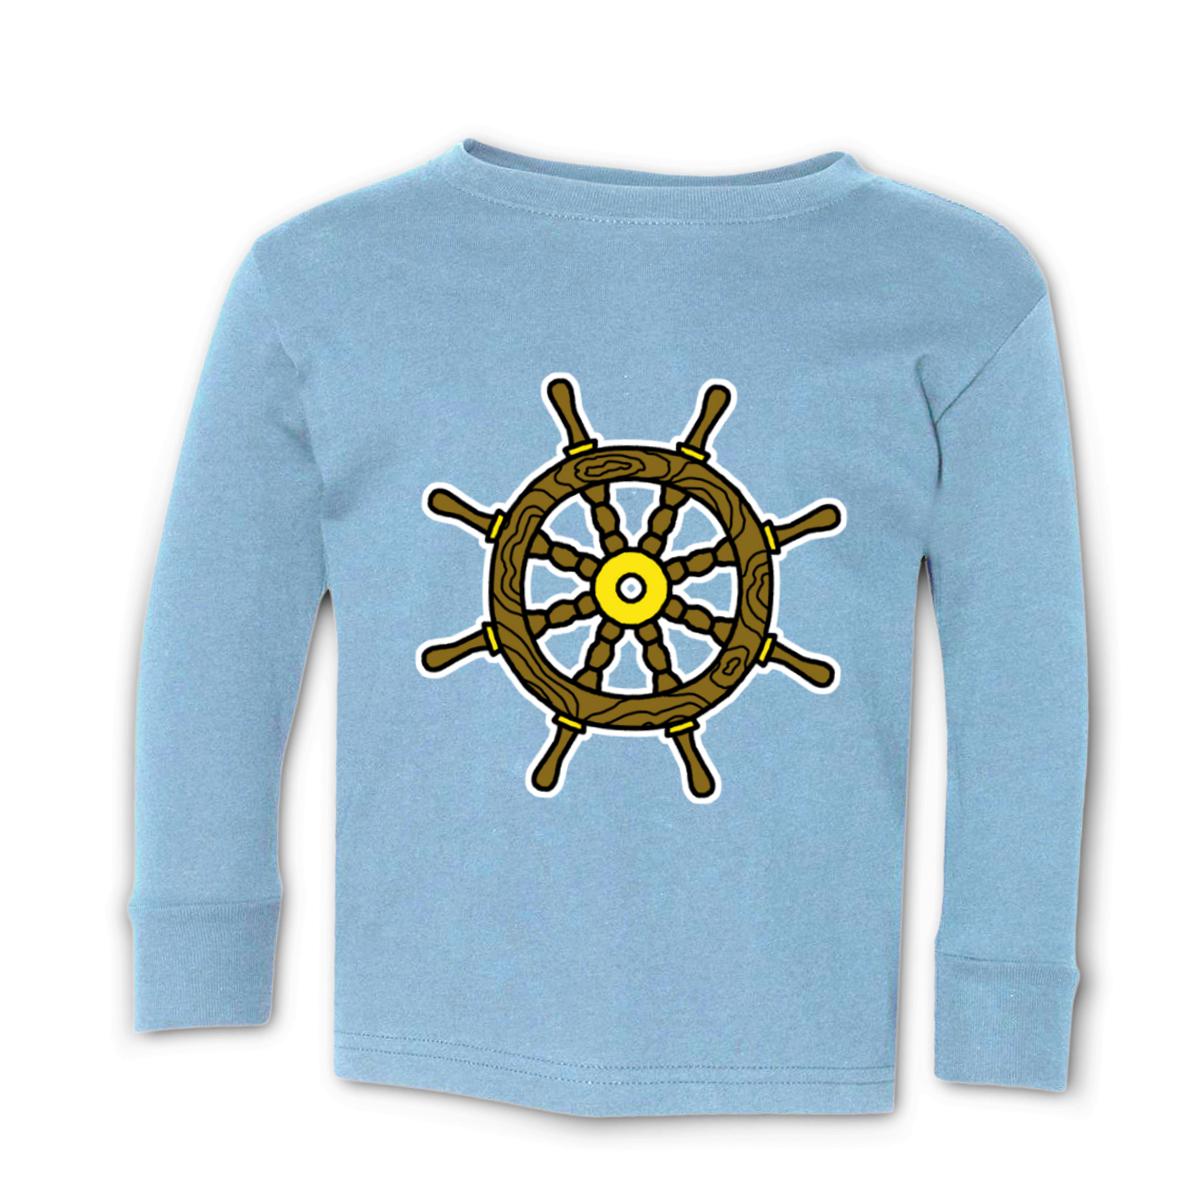 American Traditional Ship Wheel Toddler Long Sleeve Tee 56T light-blue